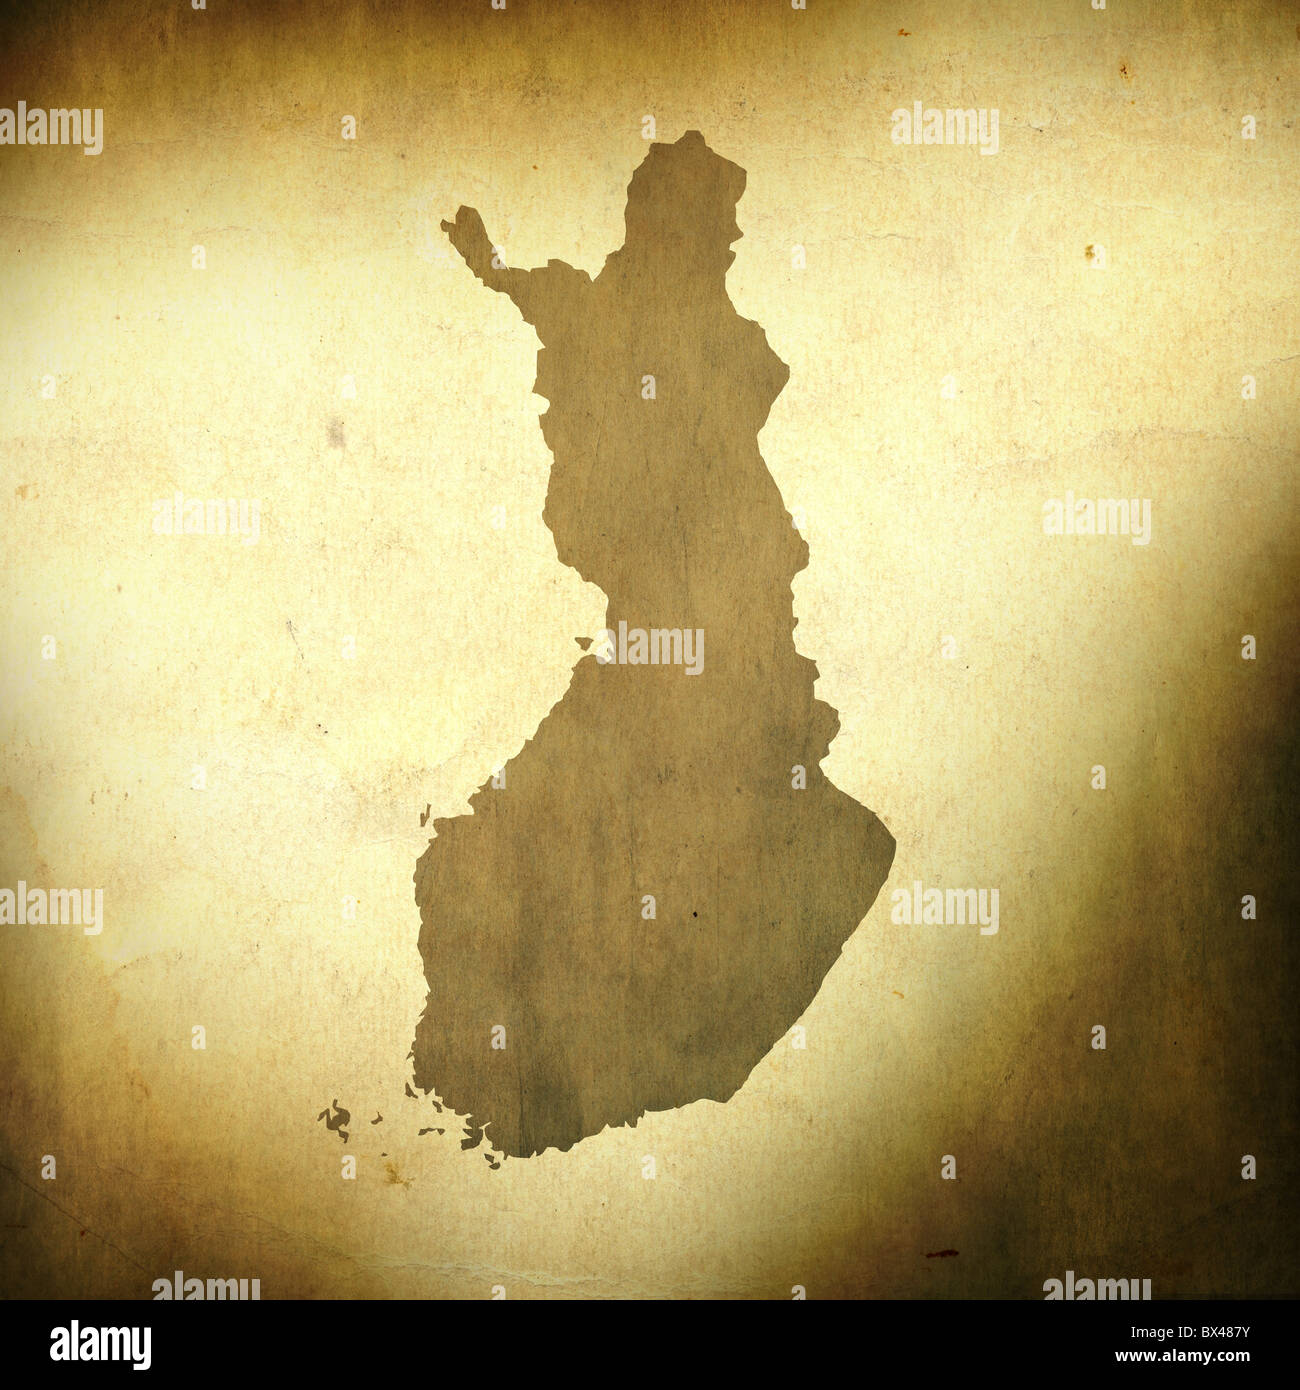 There is a map of Finland on grunge paper background Stock Photo